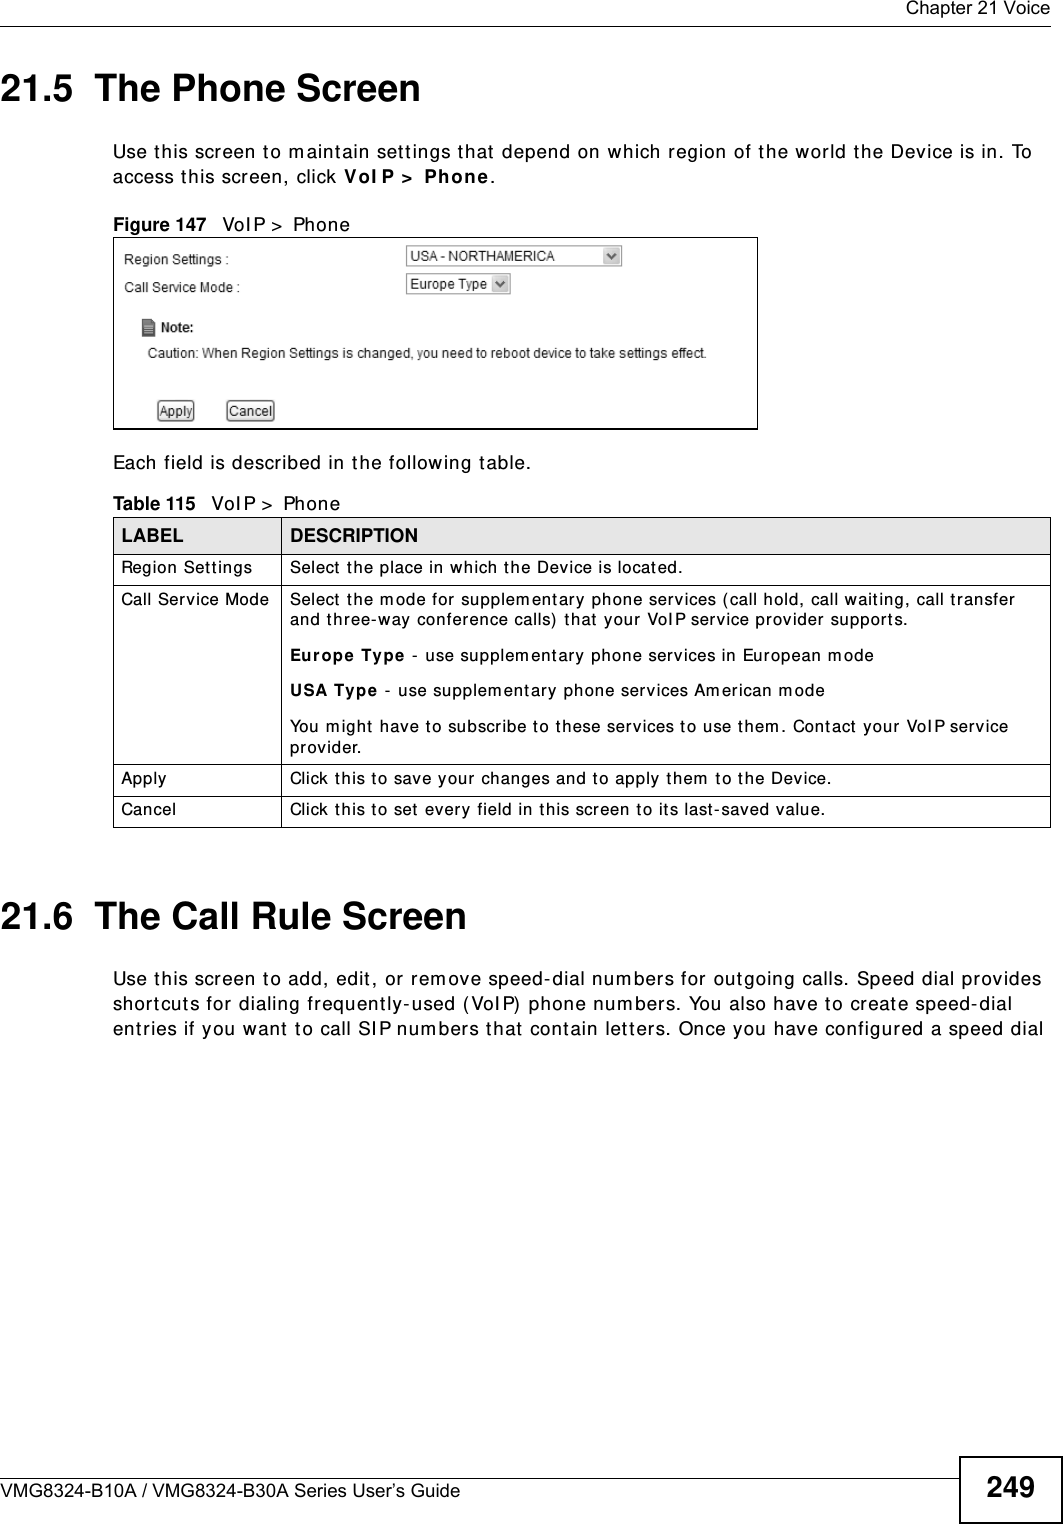  Chapter 21 VoiceVMG8324-B10A / VMG8324-B30A Series User’s Guide 24921.5  The Phone Screen Use t his screen t o m aint ain set tings t hat  depend on which region of the w orld the Device is in. To access t his screen, click VoI P &gt;  Phone.Figure 147   VoI P &gt;  Ph one Each field is described in t he following table.21.6  The Call Rule ScreenUse t his screen t o add, edit , or rem ove speed-dial num bers for out going calls. Speed dial provides short cuts for dialing frequently- used (VoI P)  phone num bers. You also have t o create speed-dial ent ries if you want to call SI P num bers t hat  contain let ters. Once you have configured a speed dial Table 115   VoI P &gt;  PhoneLABEL DESCRIPTIONRegion Set t ings Select t he place in which the Device is locat ed.Call Service Mode Select  the mode for supplem entary  phone services (call hold, call wait ing, call transfer and three-way conference calls)  that  your VoI P ser vice prov ider supports.Europe  Type  -  use supplem ent ary phone services in European m odeUSA Type -  use supplem ent ary phone services Am erican m odeYou m ight  have to subscribe to t hese services t o use them . Cont act your VoI P service provider.Apply Click t his t o save your changes and to apply them  t o the Device.Cancel Click this to set every field in t his screen t o it s last - saved value.